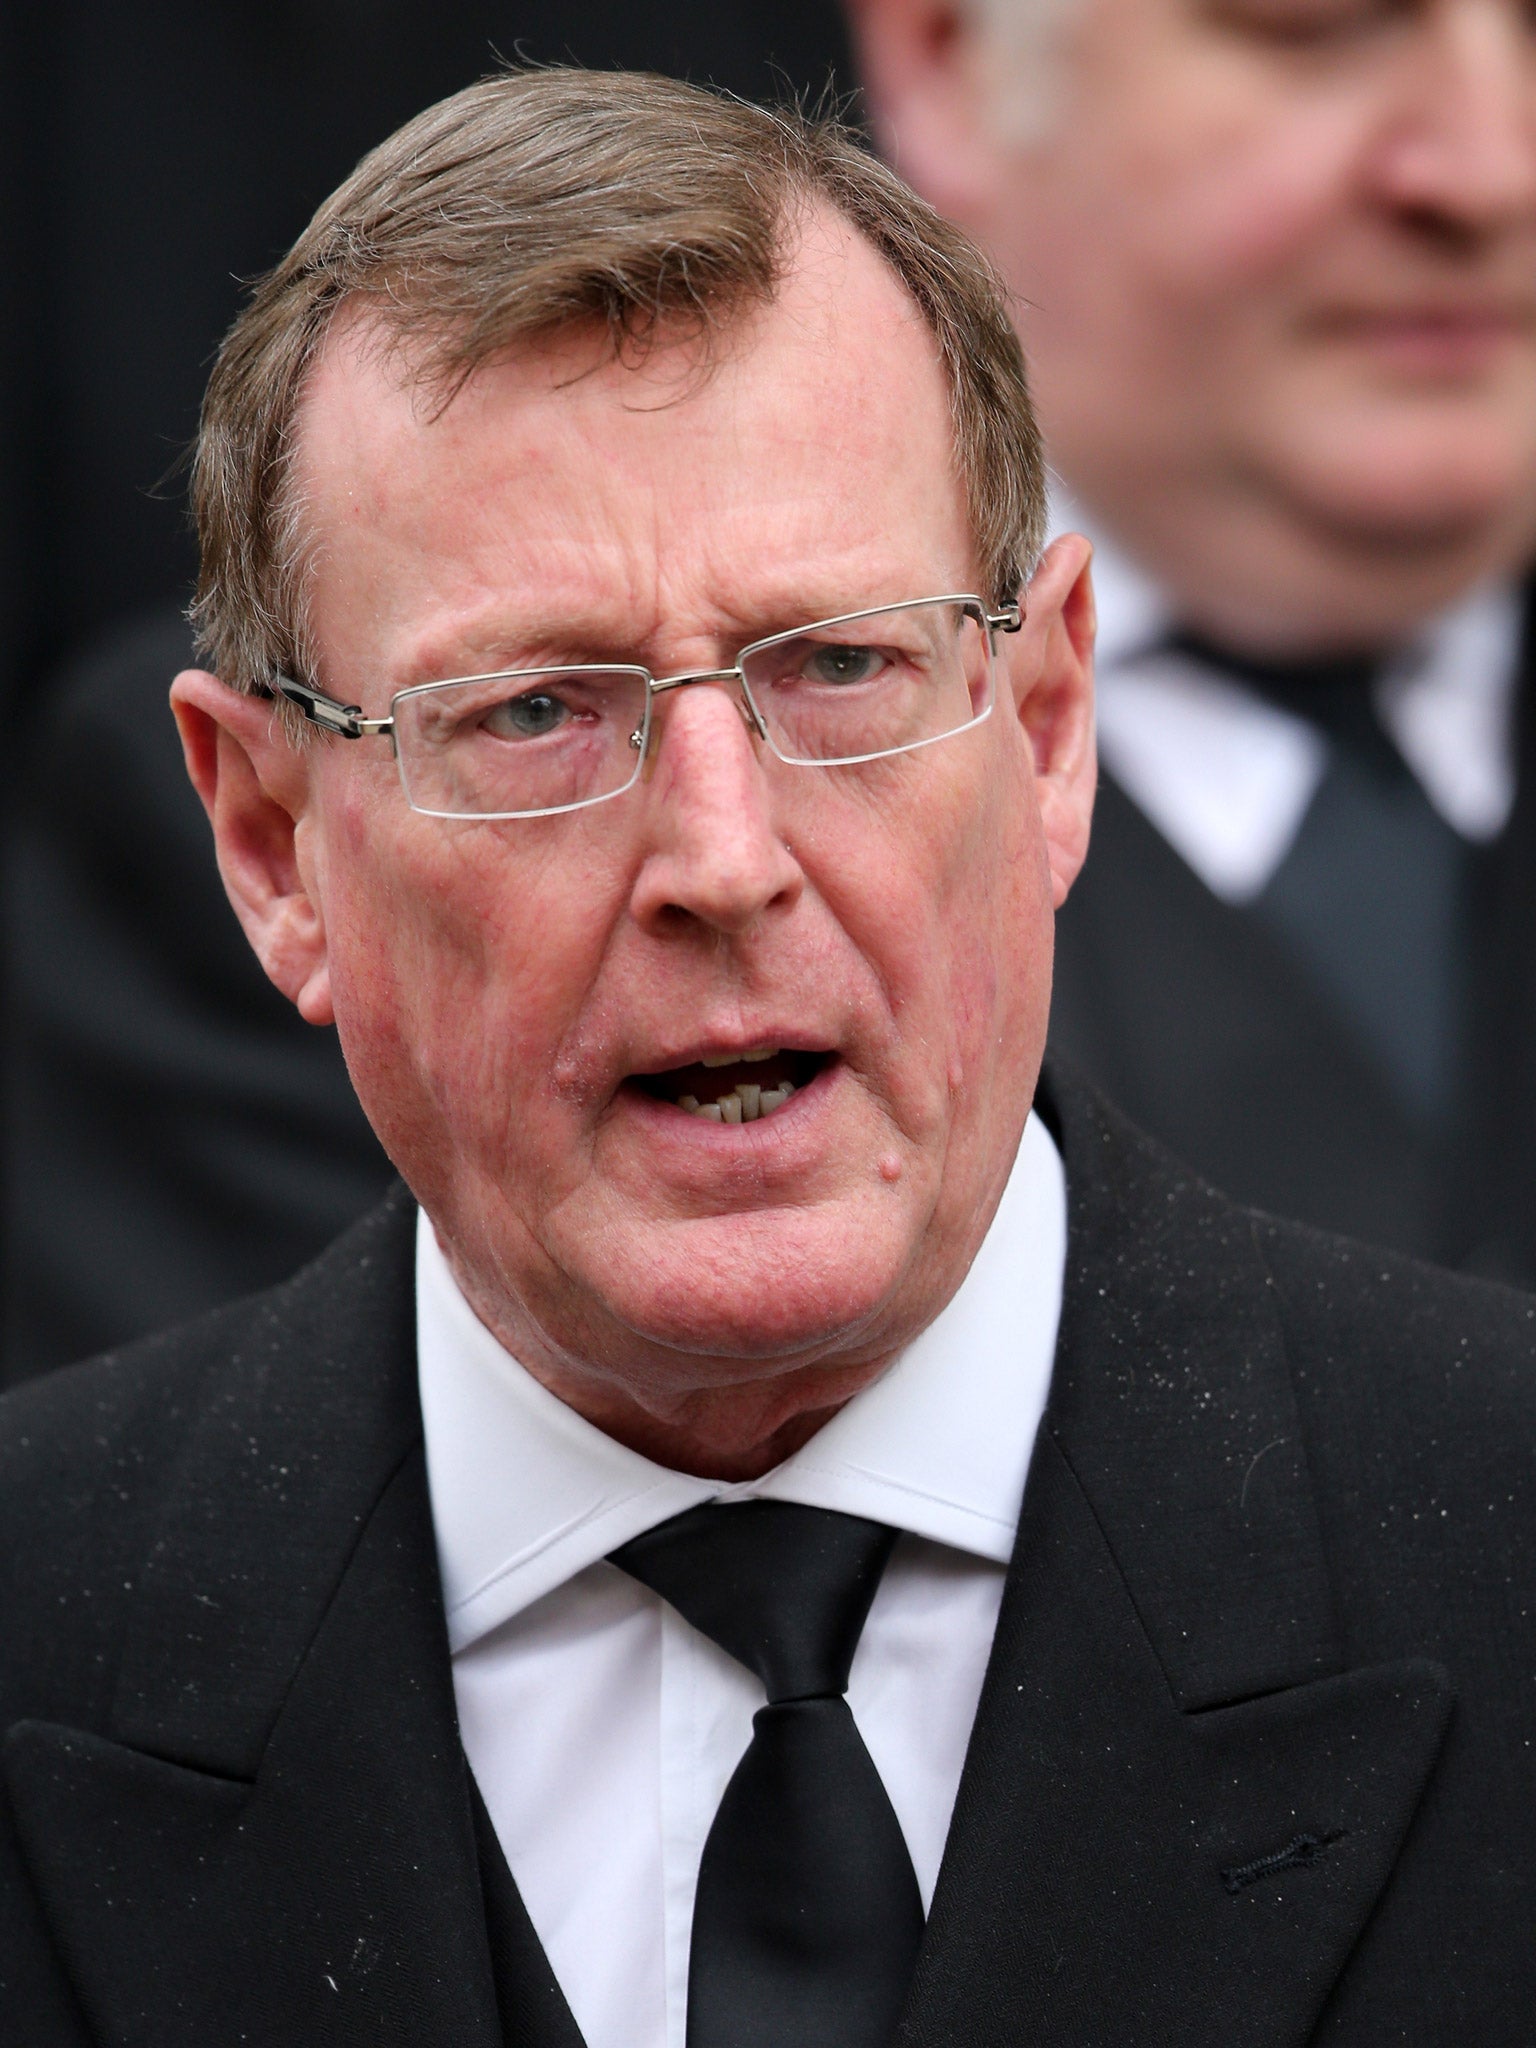 Lord Trimble, the former Northern Ireland First Minister, said people should be "grown up" about the DUP's controversial demands